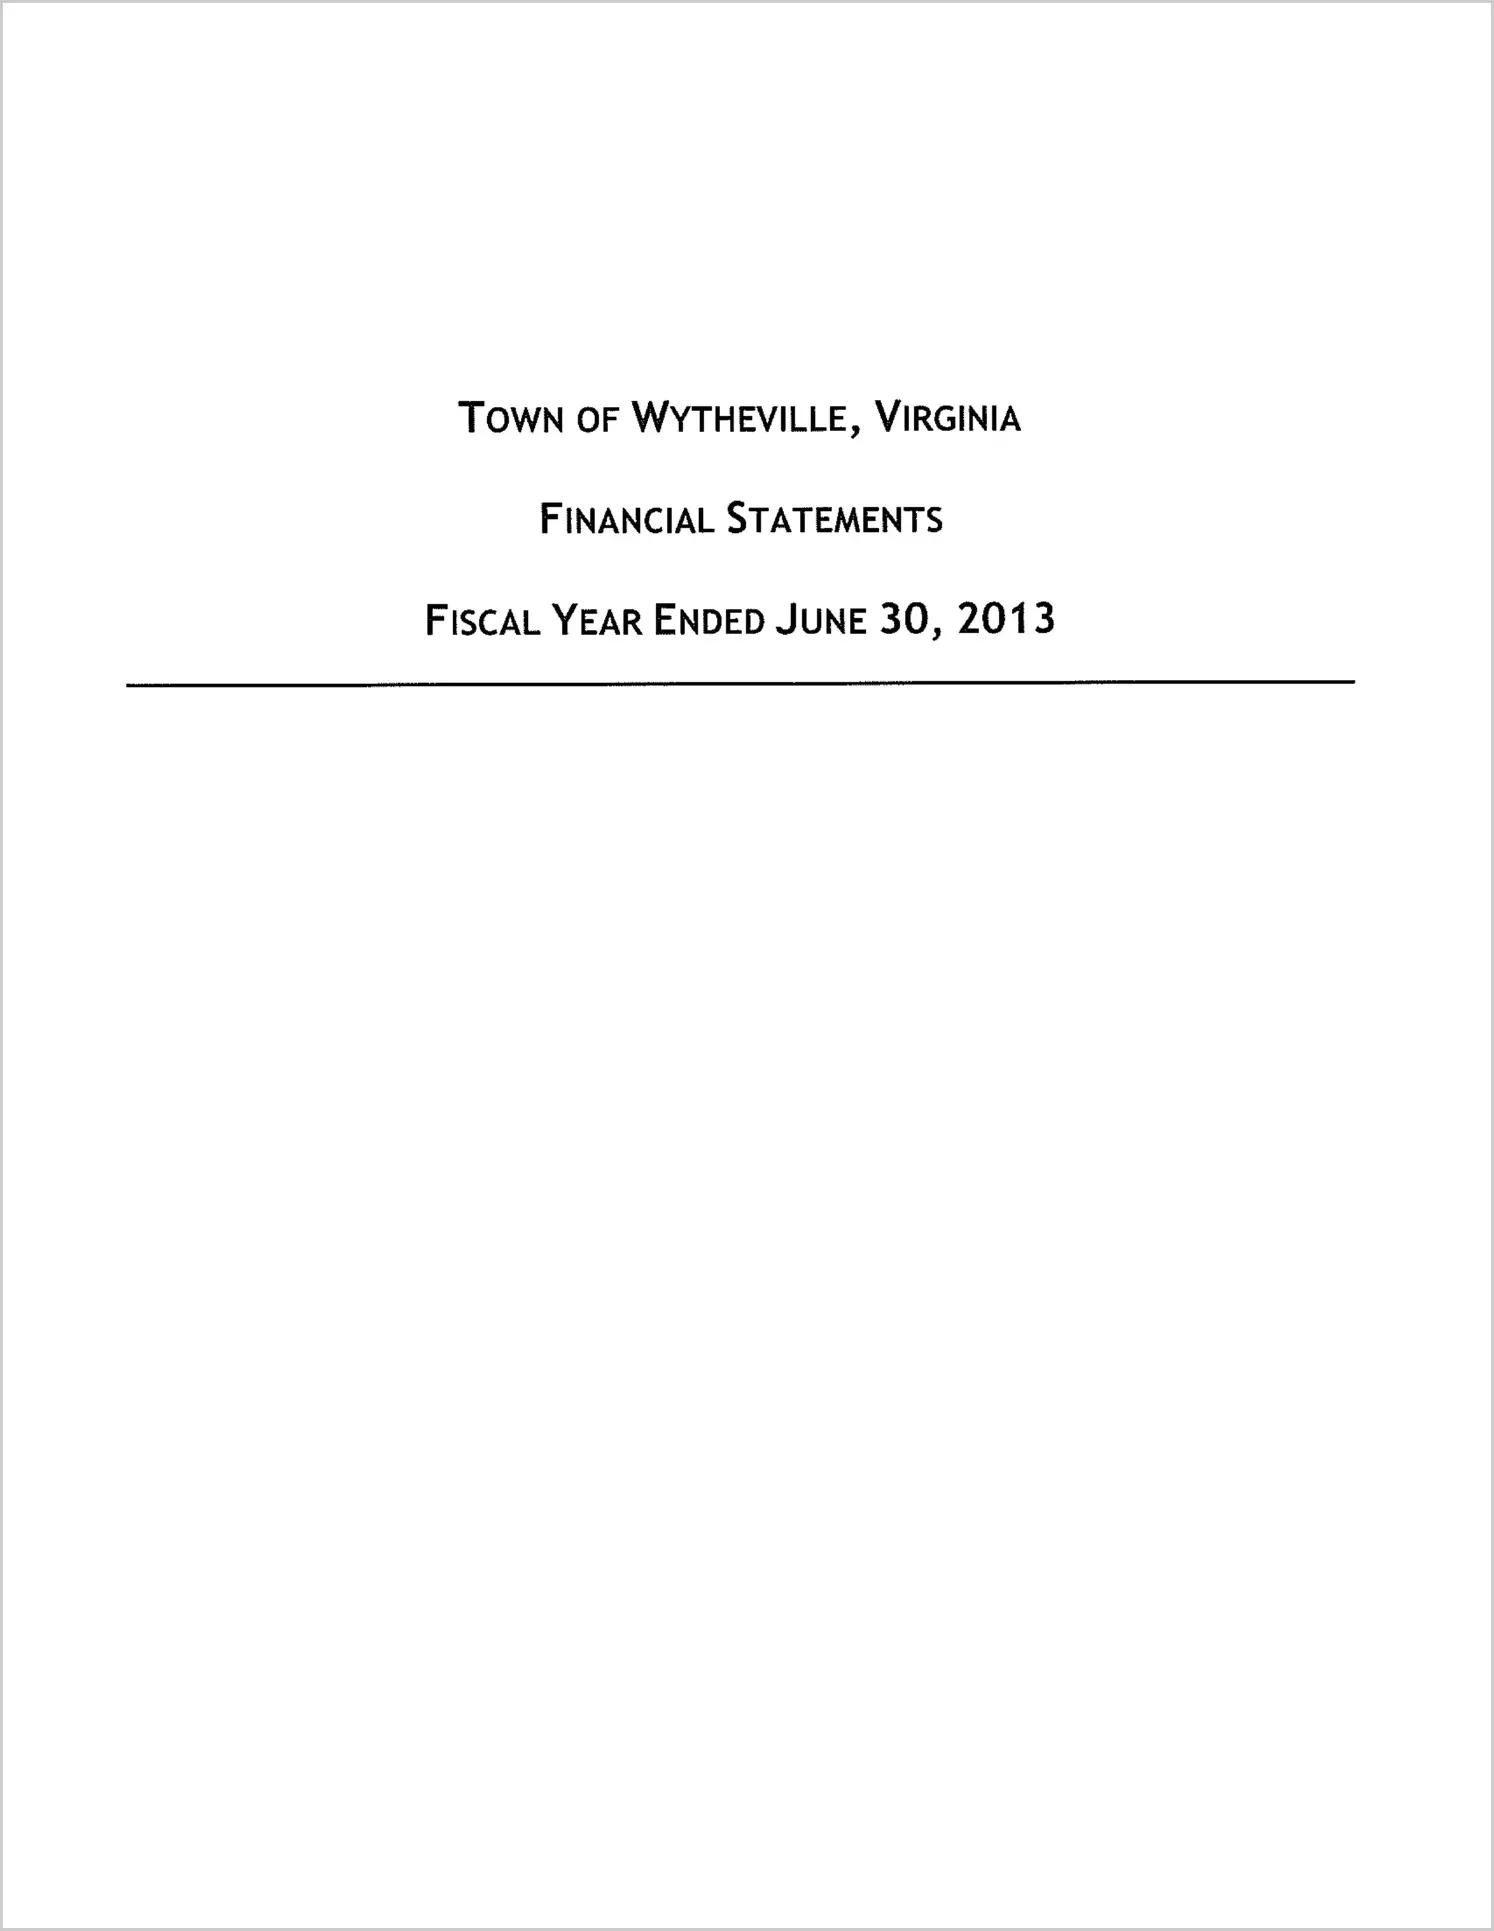 2013 Annual Financial Report for Town of Wytheville